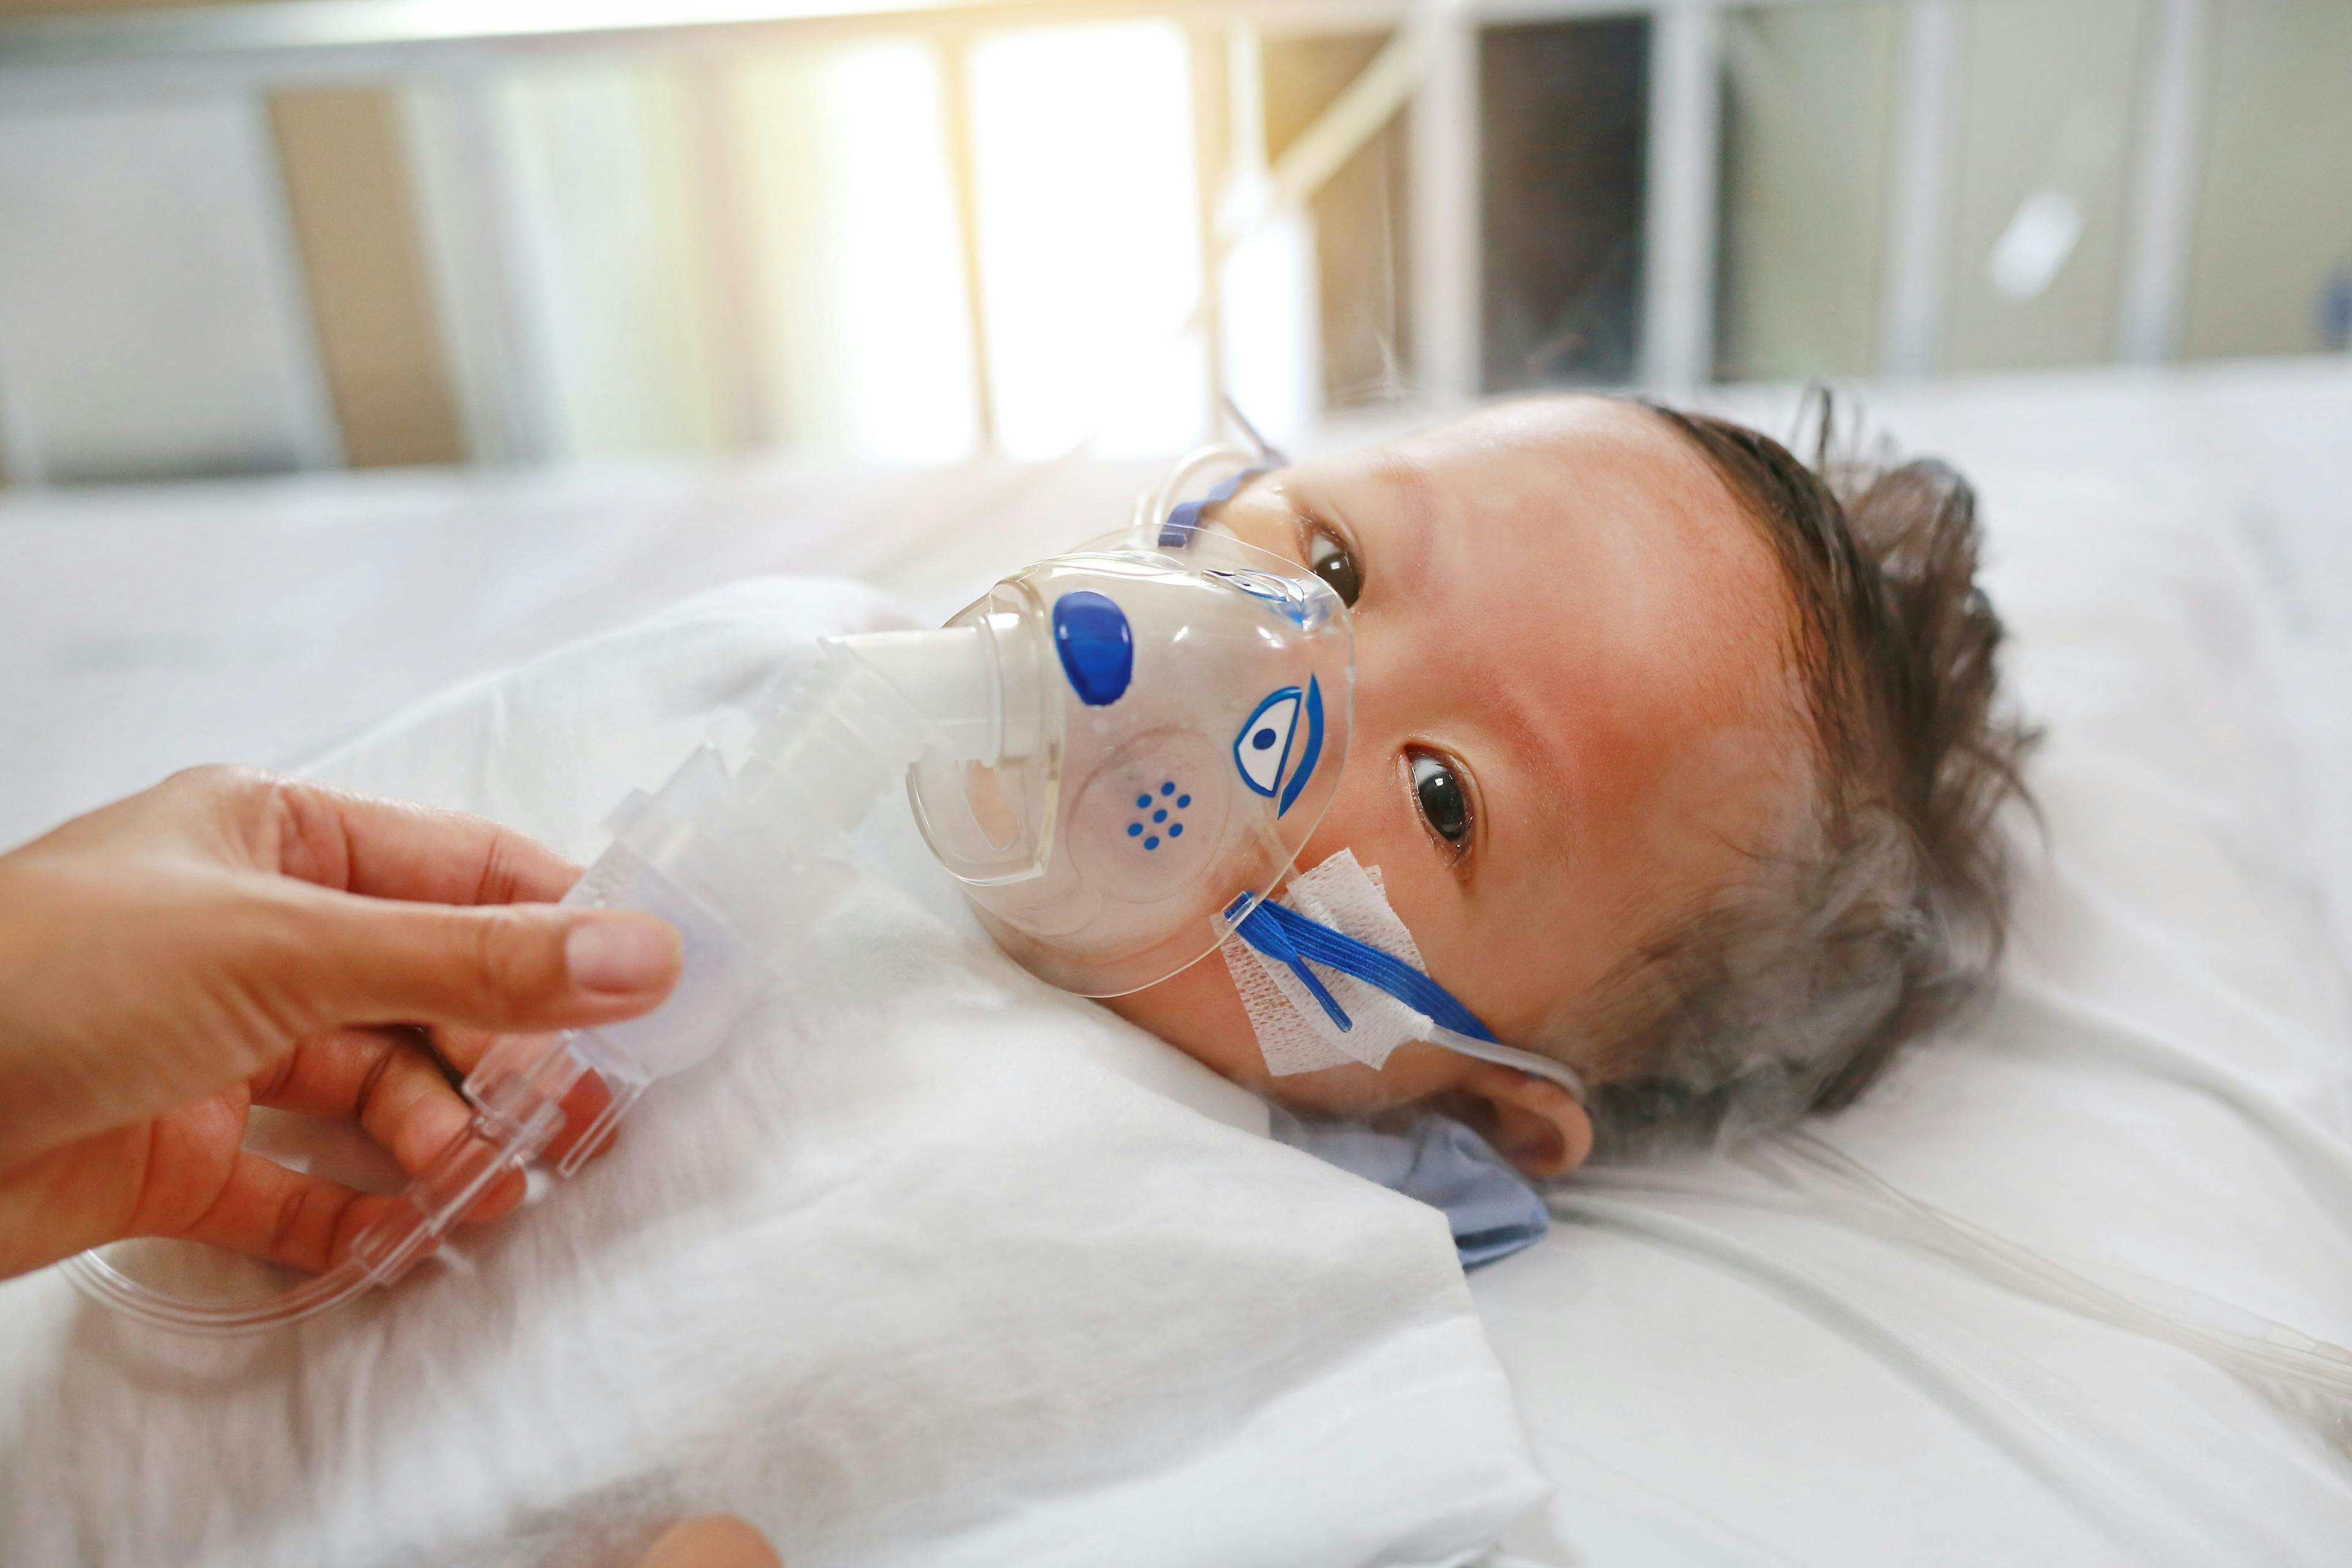 Sick baby boy applying inhale medication by inhalation mask to cure Respiratory Syncytial Virus (RSV) on patient bed at hospital. | Image Credit: zilvergolf - stock.adobe.com